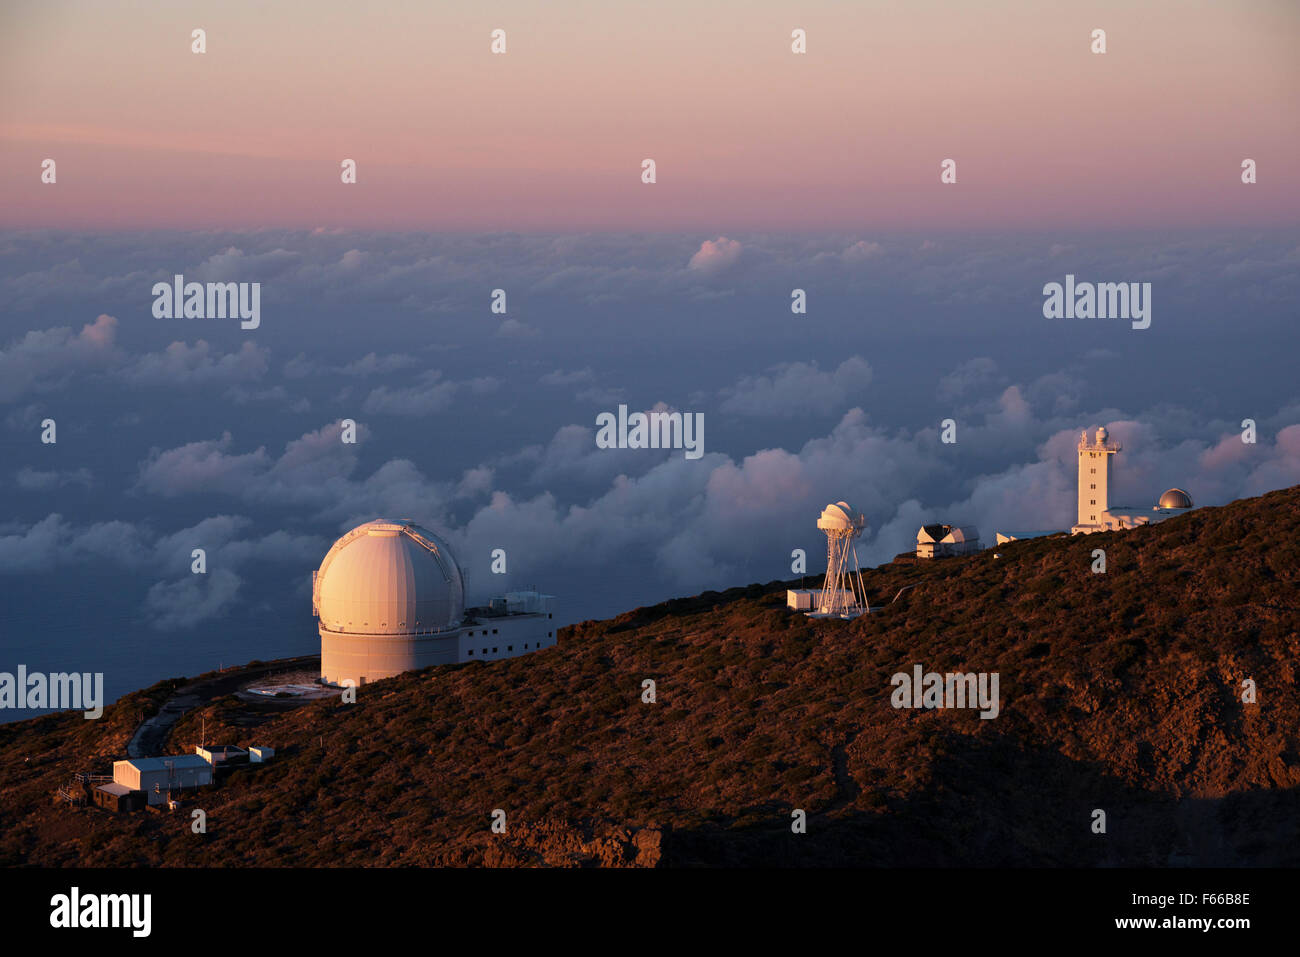 astronomical observatory on the top of Roque de los Muchachos, La Palma, Canary Islands, Spain Stock Photo